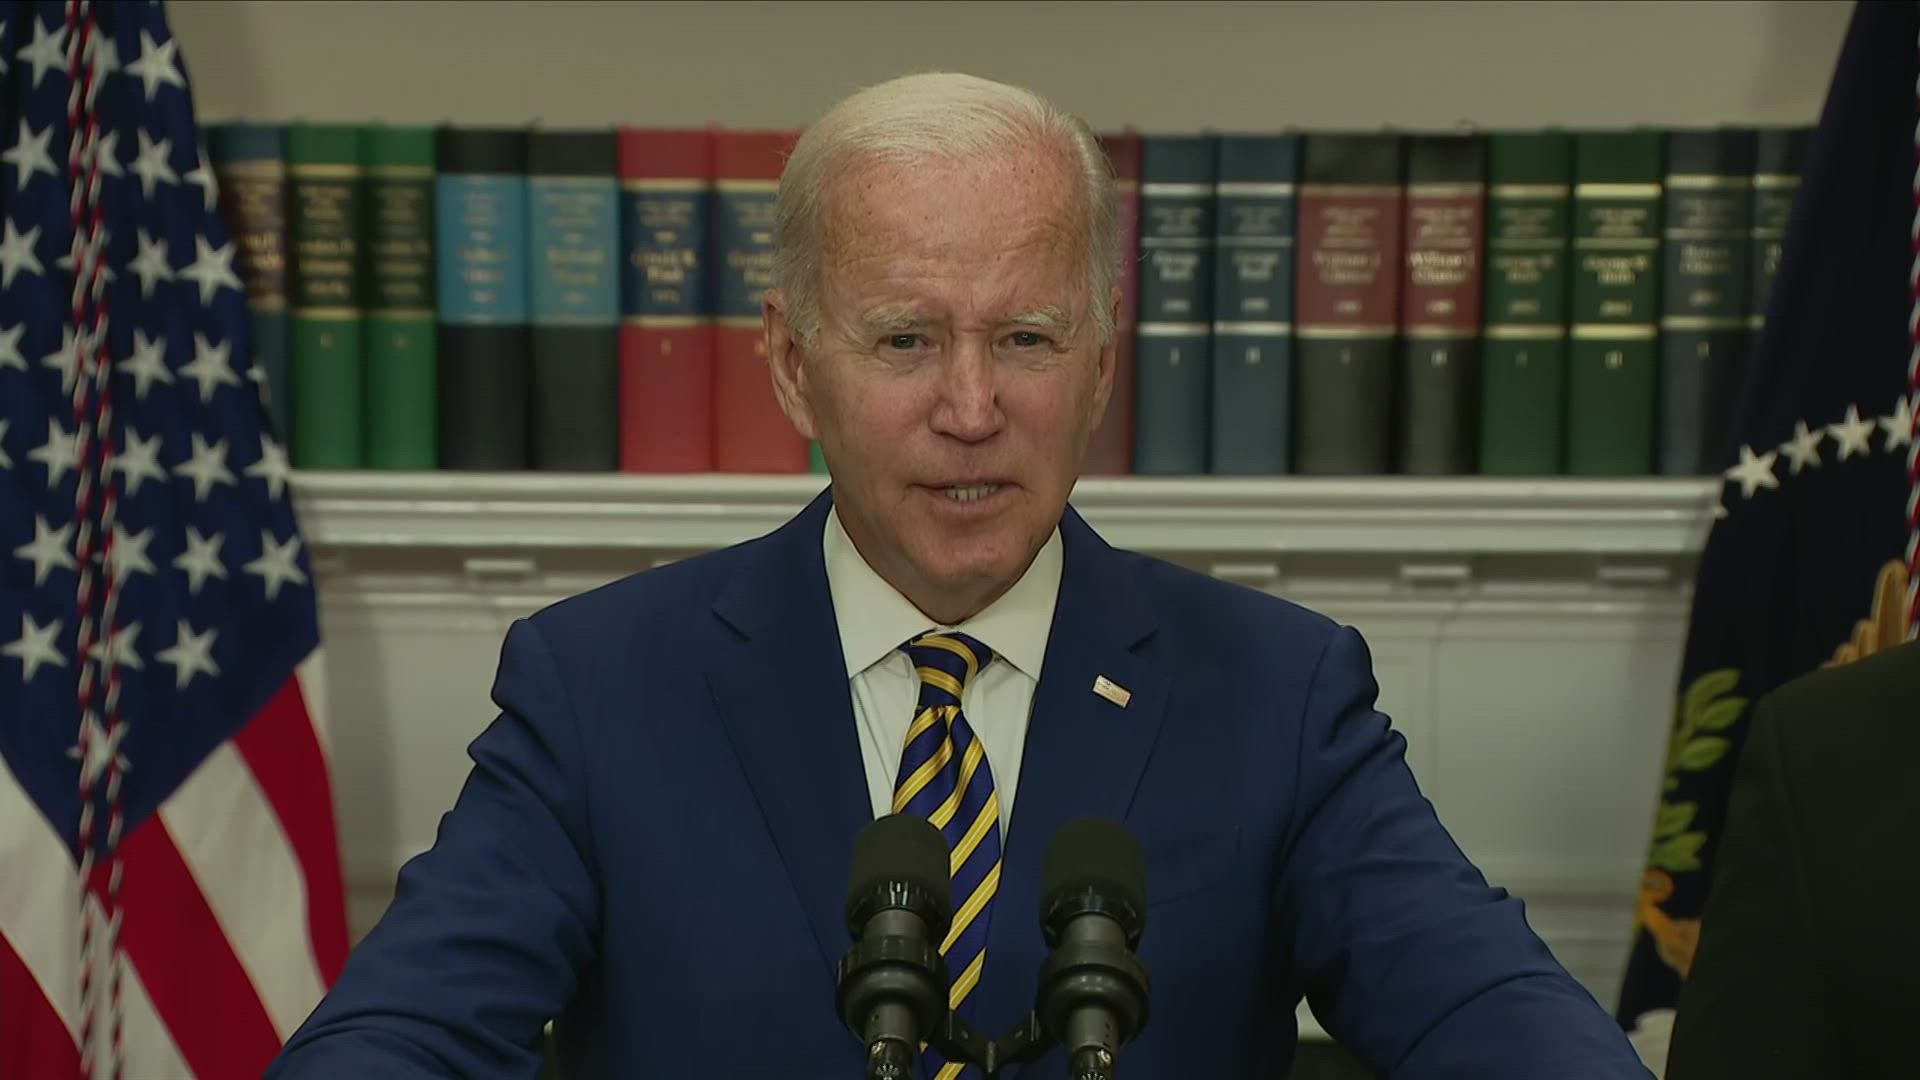 President Biden addressed those who think his student debt relief proposal is 'too much' or 'too little.'